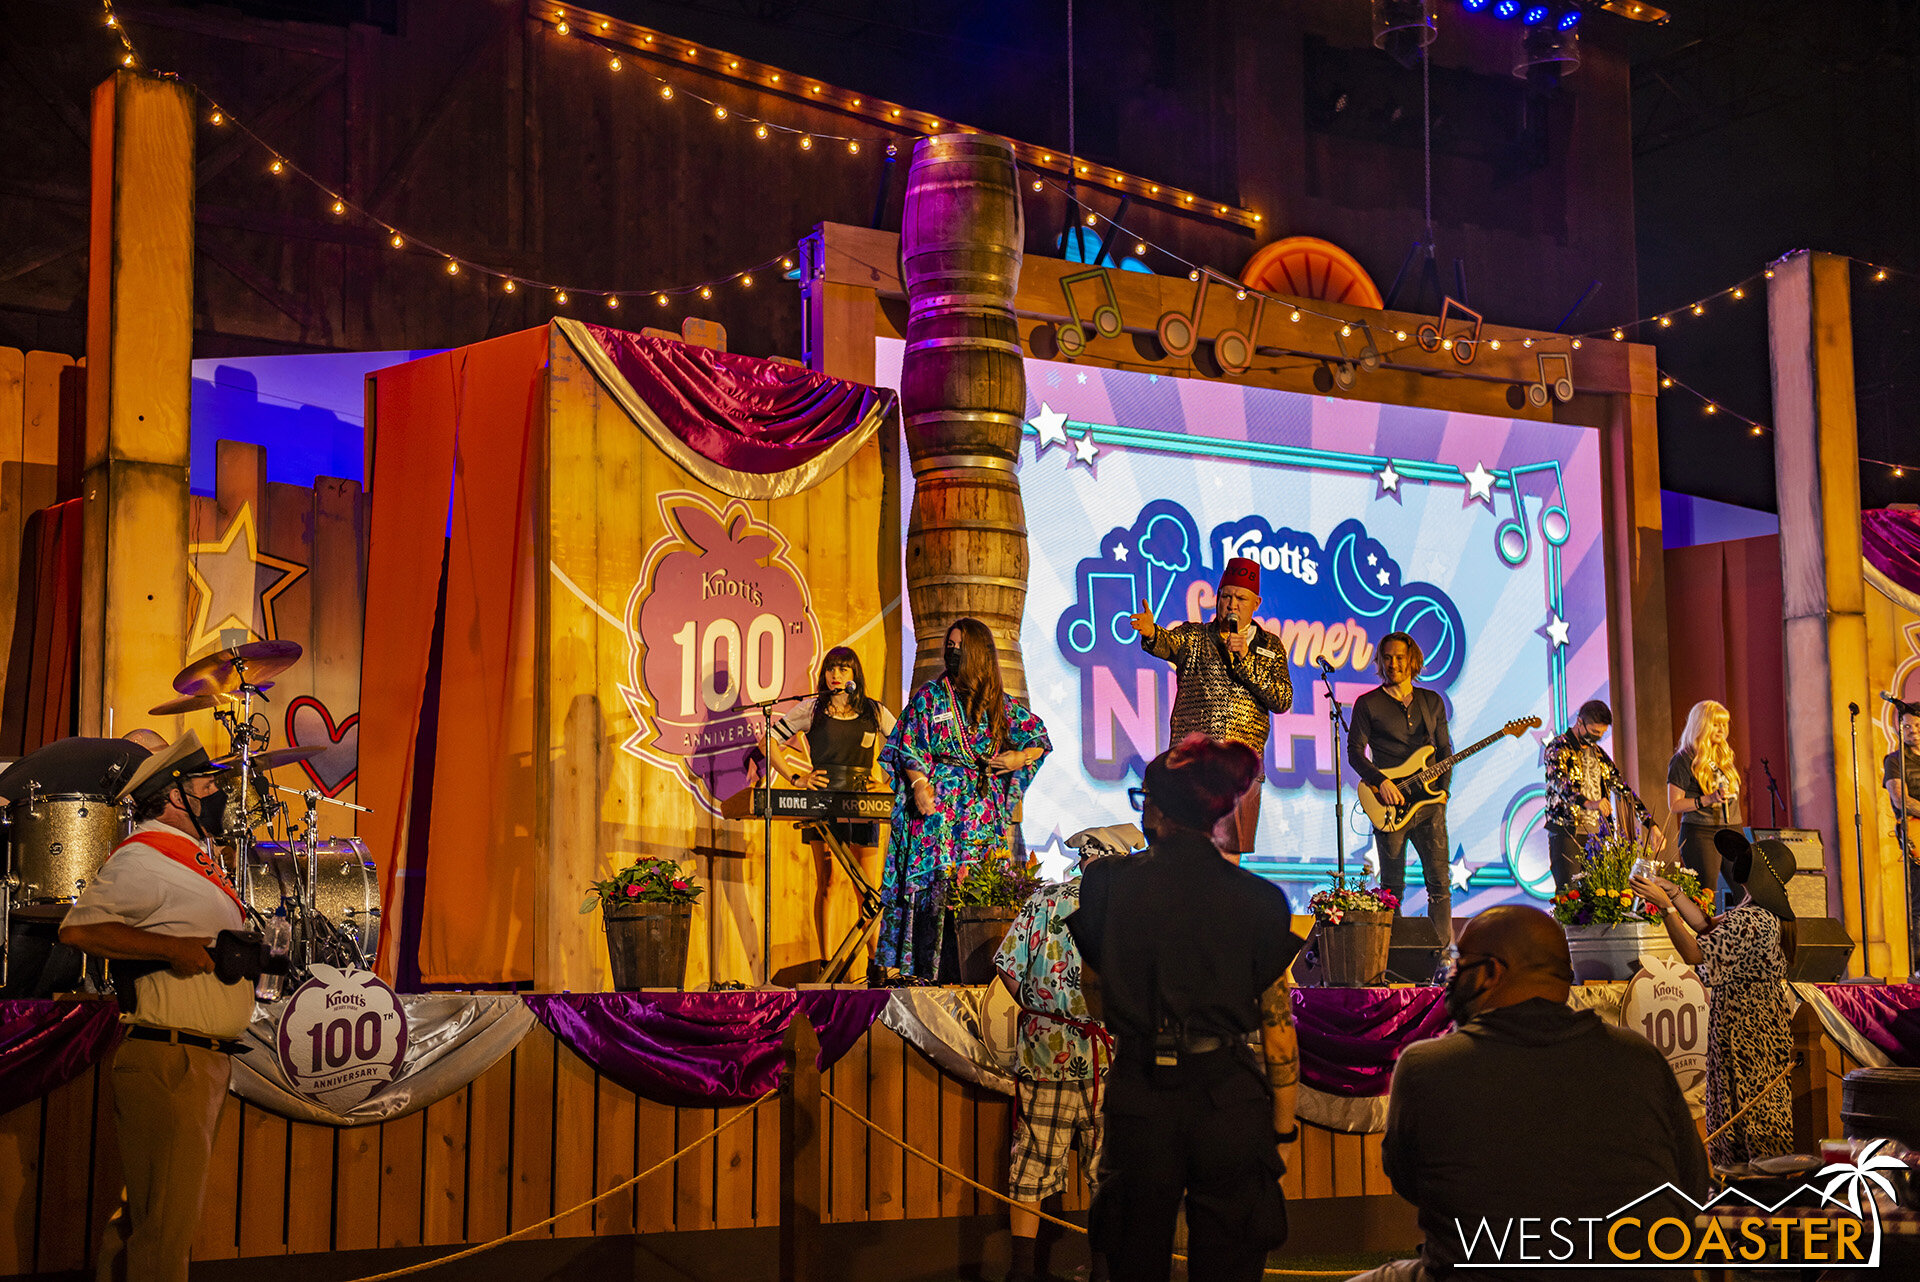  Knott’s Summer Nights returns with live bands gracing the Calico Mine Stage nightly. 